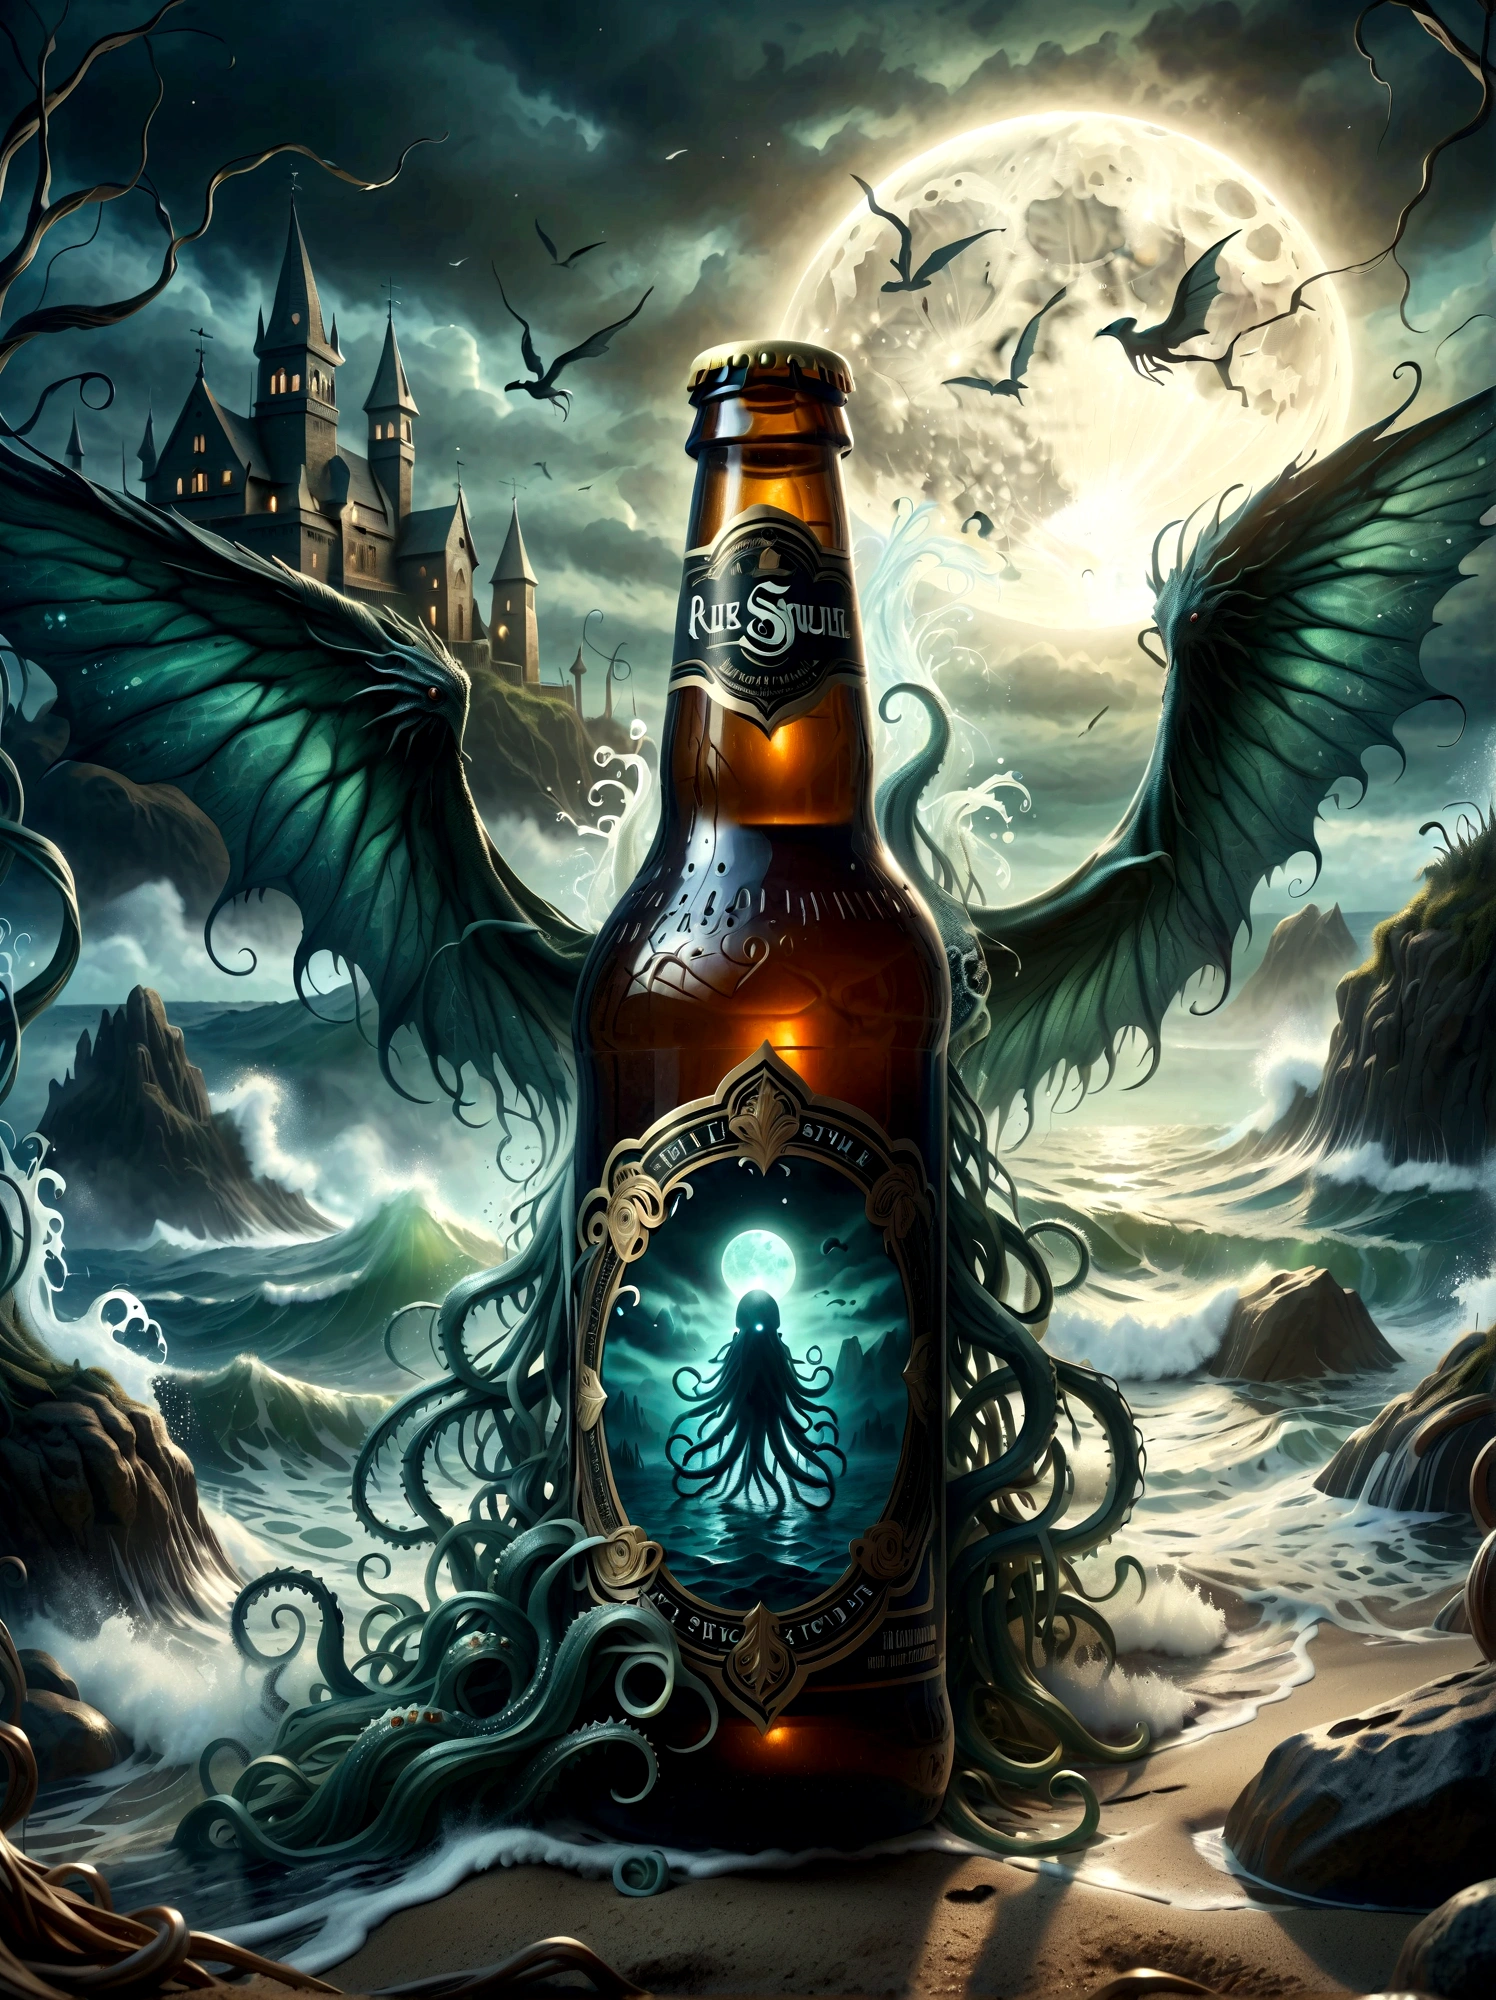 Visualize this: a dimly lighted ancient, colossal creature, reminiscent of Lovecraft's creature with tentacles and wings - descending ominously through misty waters. In the foreground, a crafted beer displaying intricate details on the bottle, the frothy ale almost spilling out of its brim, with the eerie backdrop subtly reflecting on the glass surface. The atmosphere is thick with an undercurrent of subtle horror seductively luring you into this scenario borrowed from Lovecraft's eerie world but reimagined with modern elements.